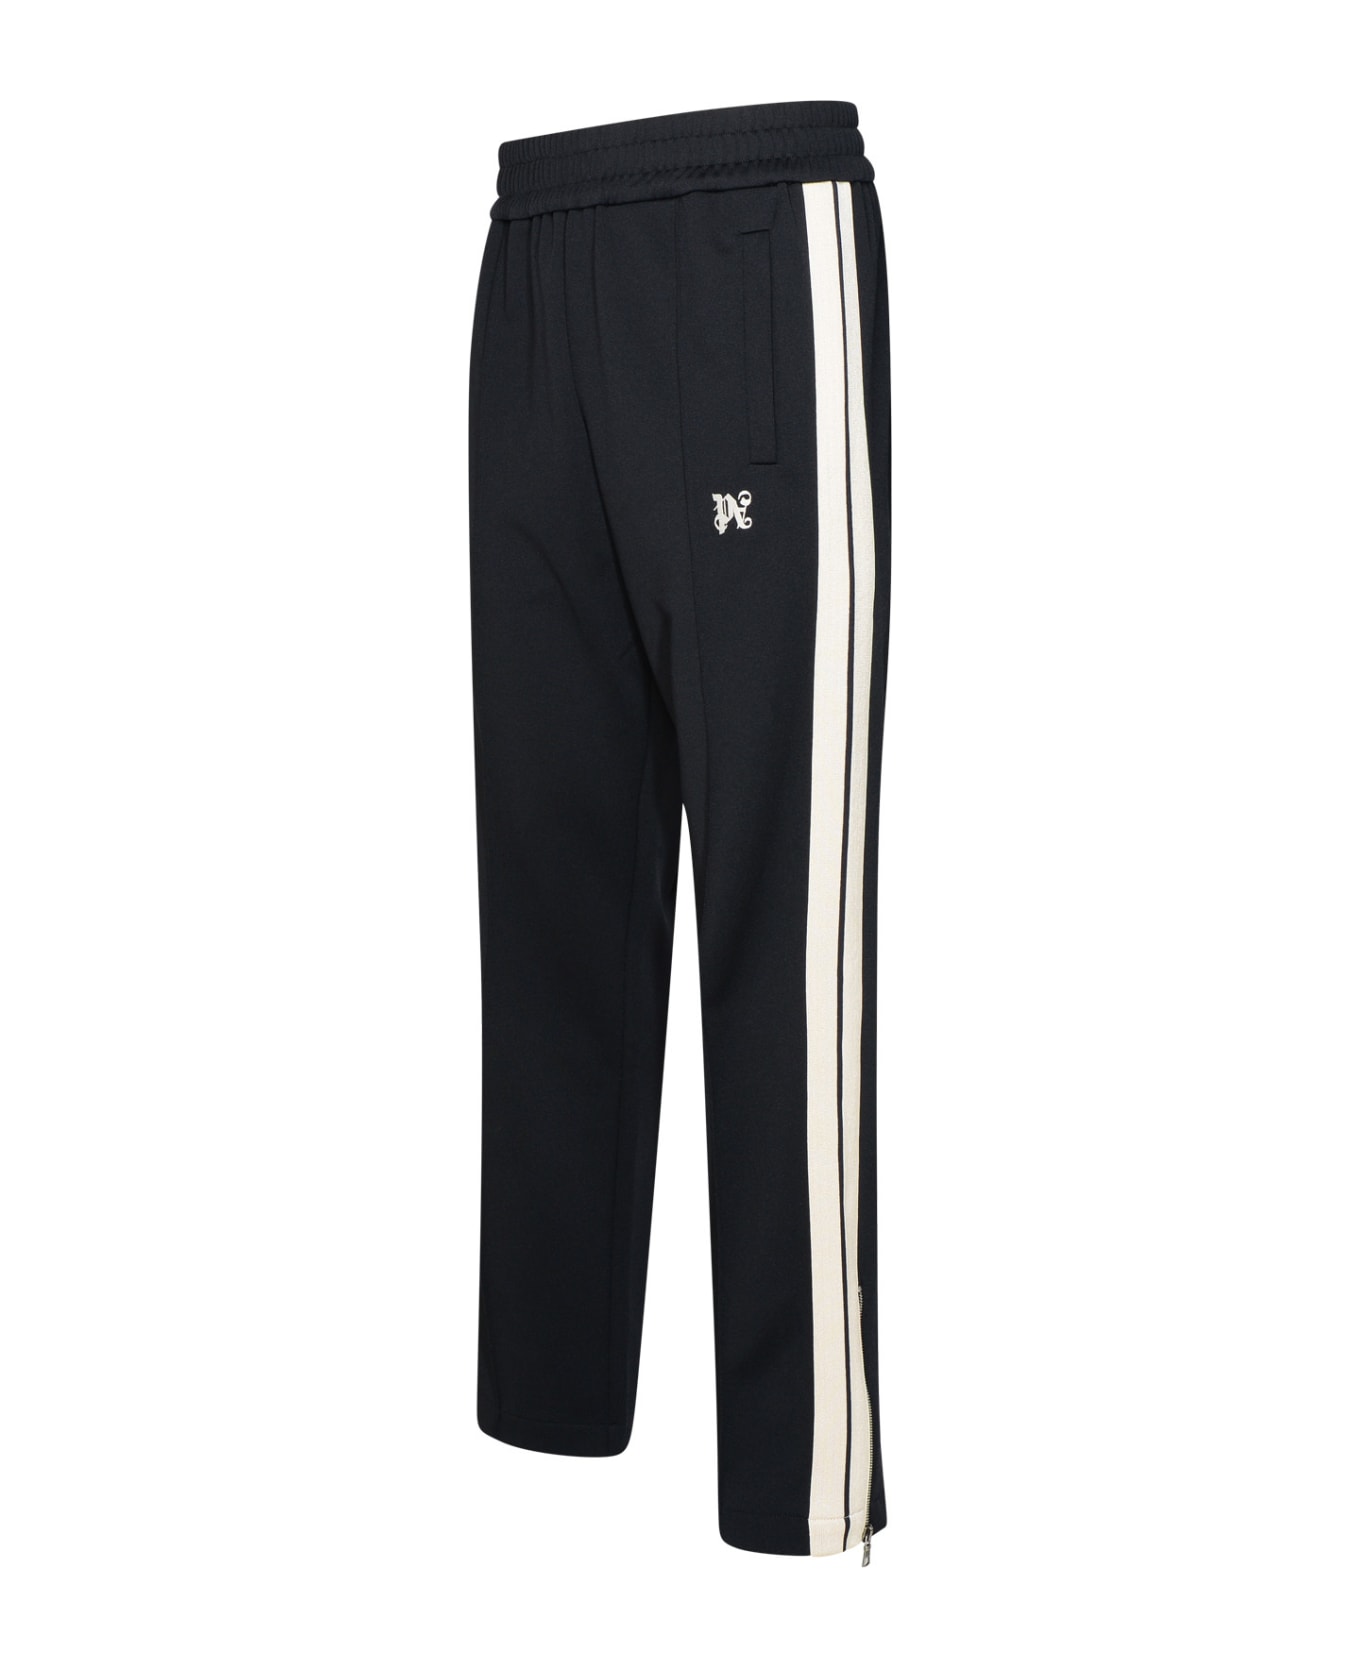 Palm Angels Track Pants In Technical Fabric - Black ボトムス